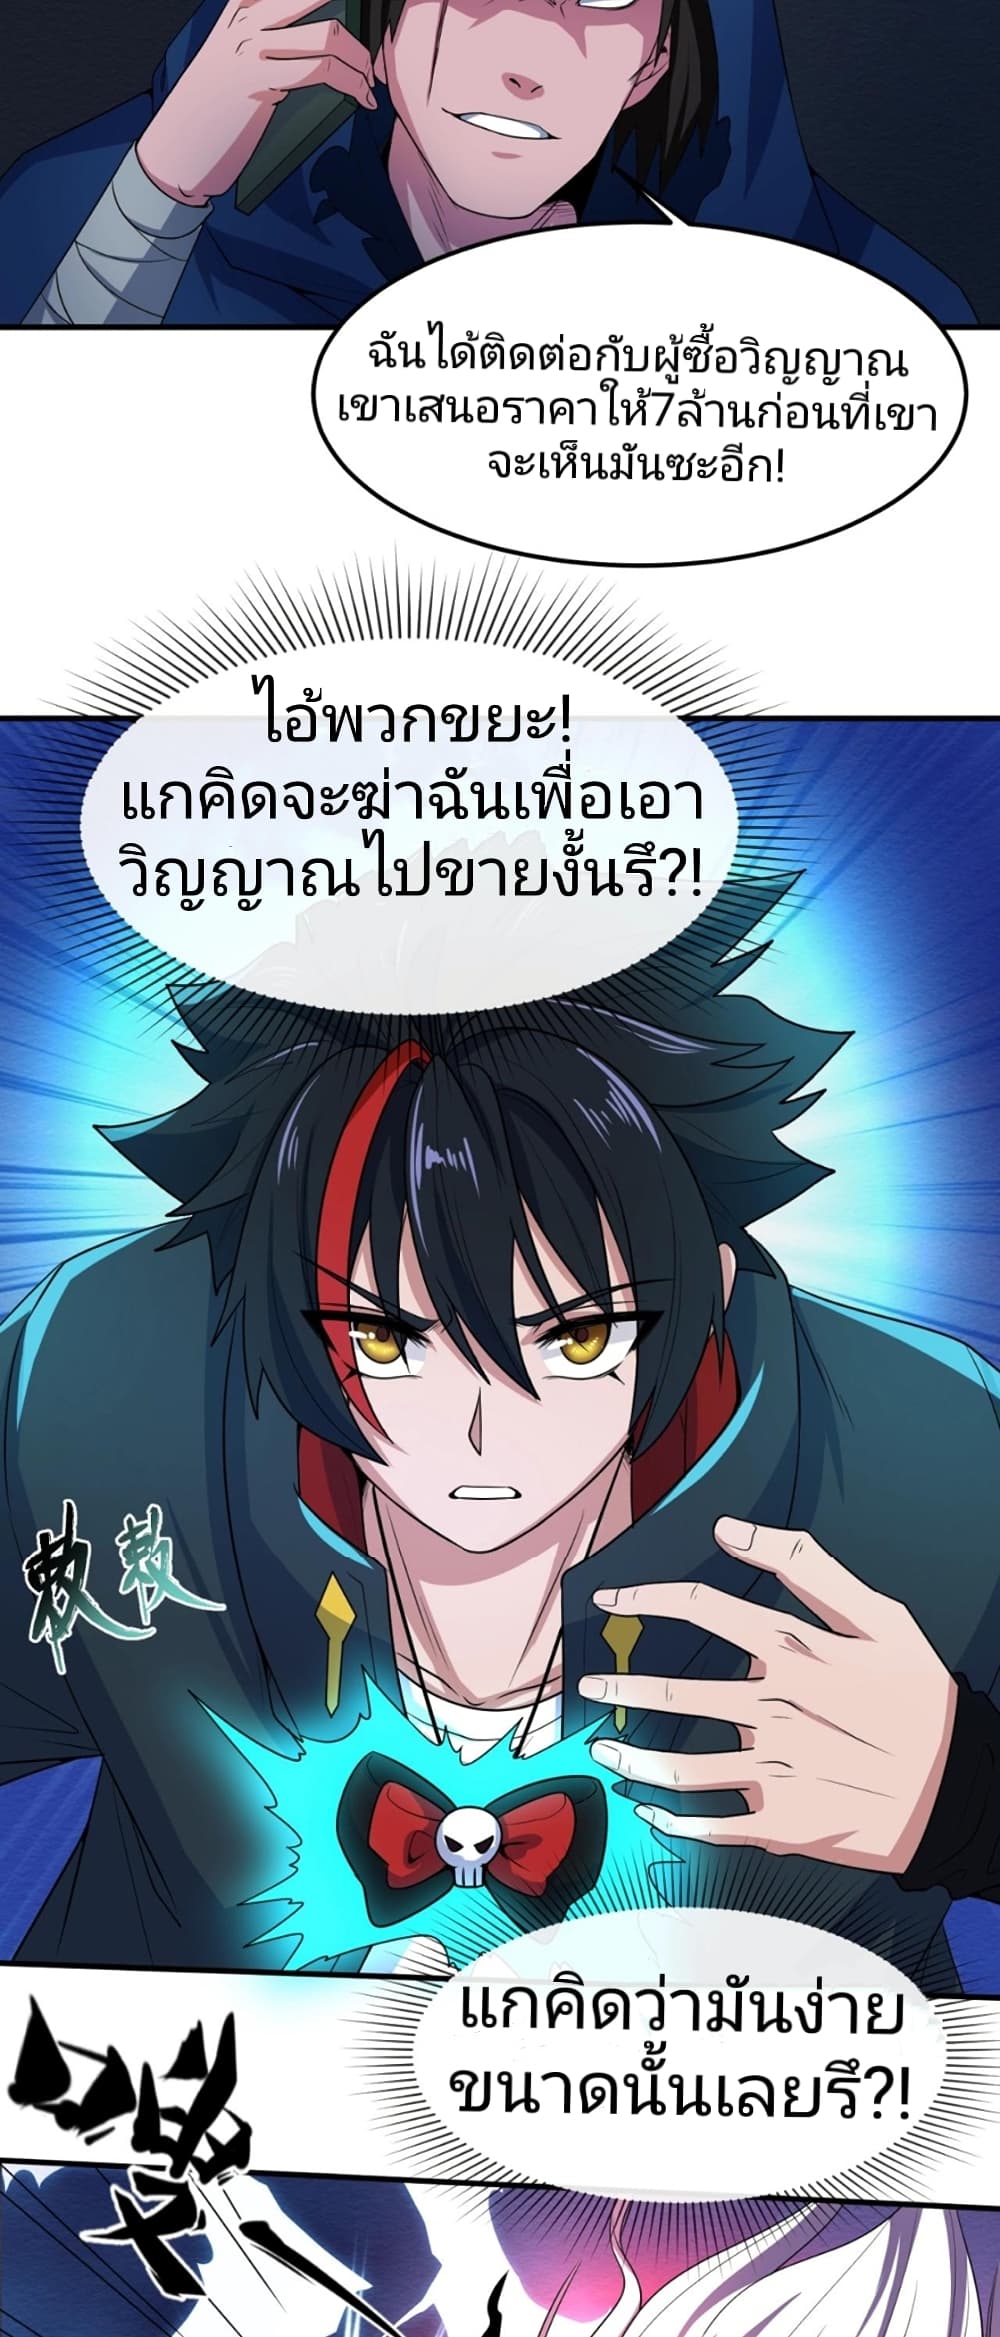 The Age of Ghost Spirits à¸à¸­à¸à¸à¸µà¹ 10 (34)